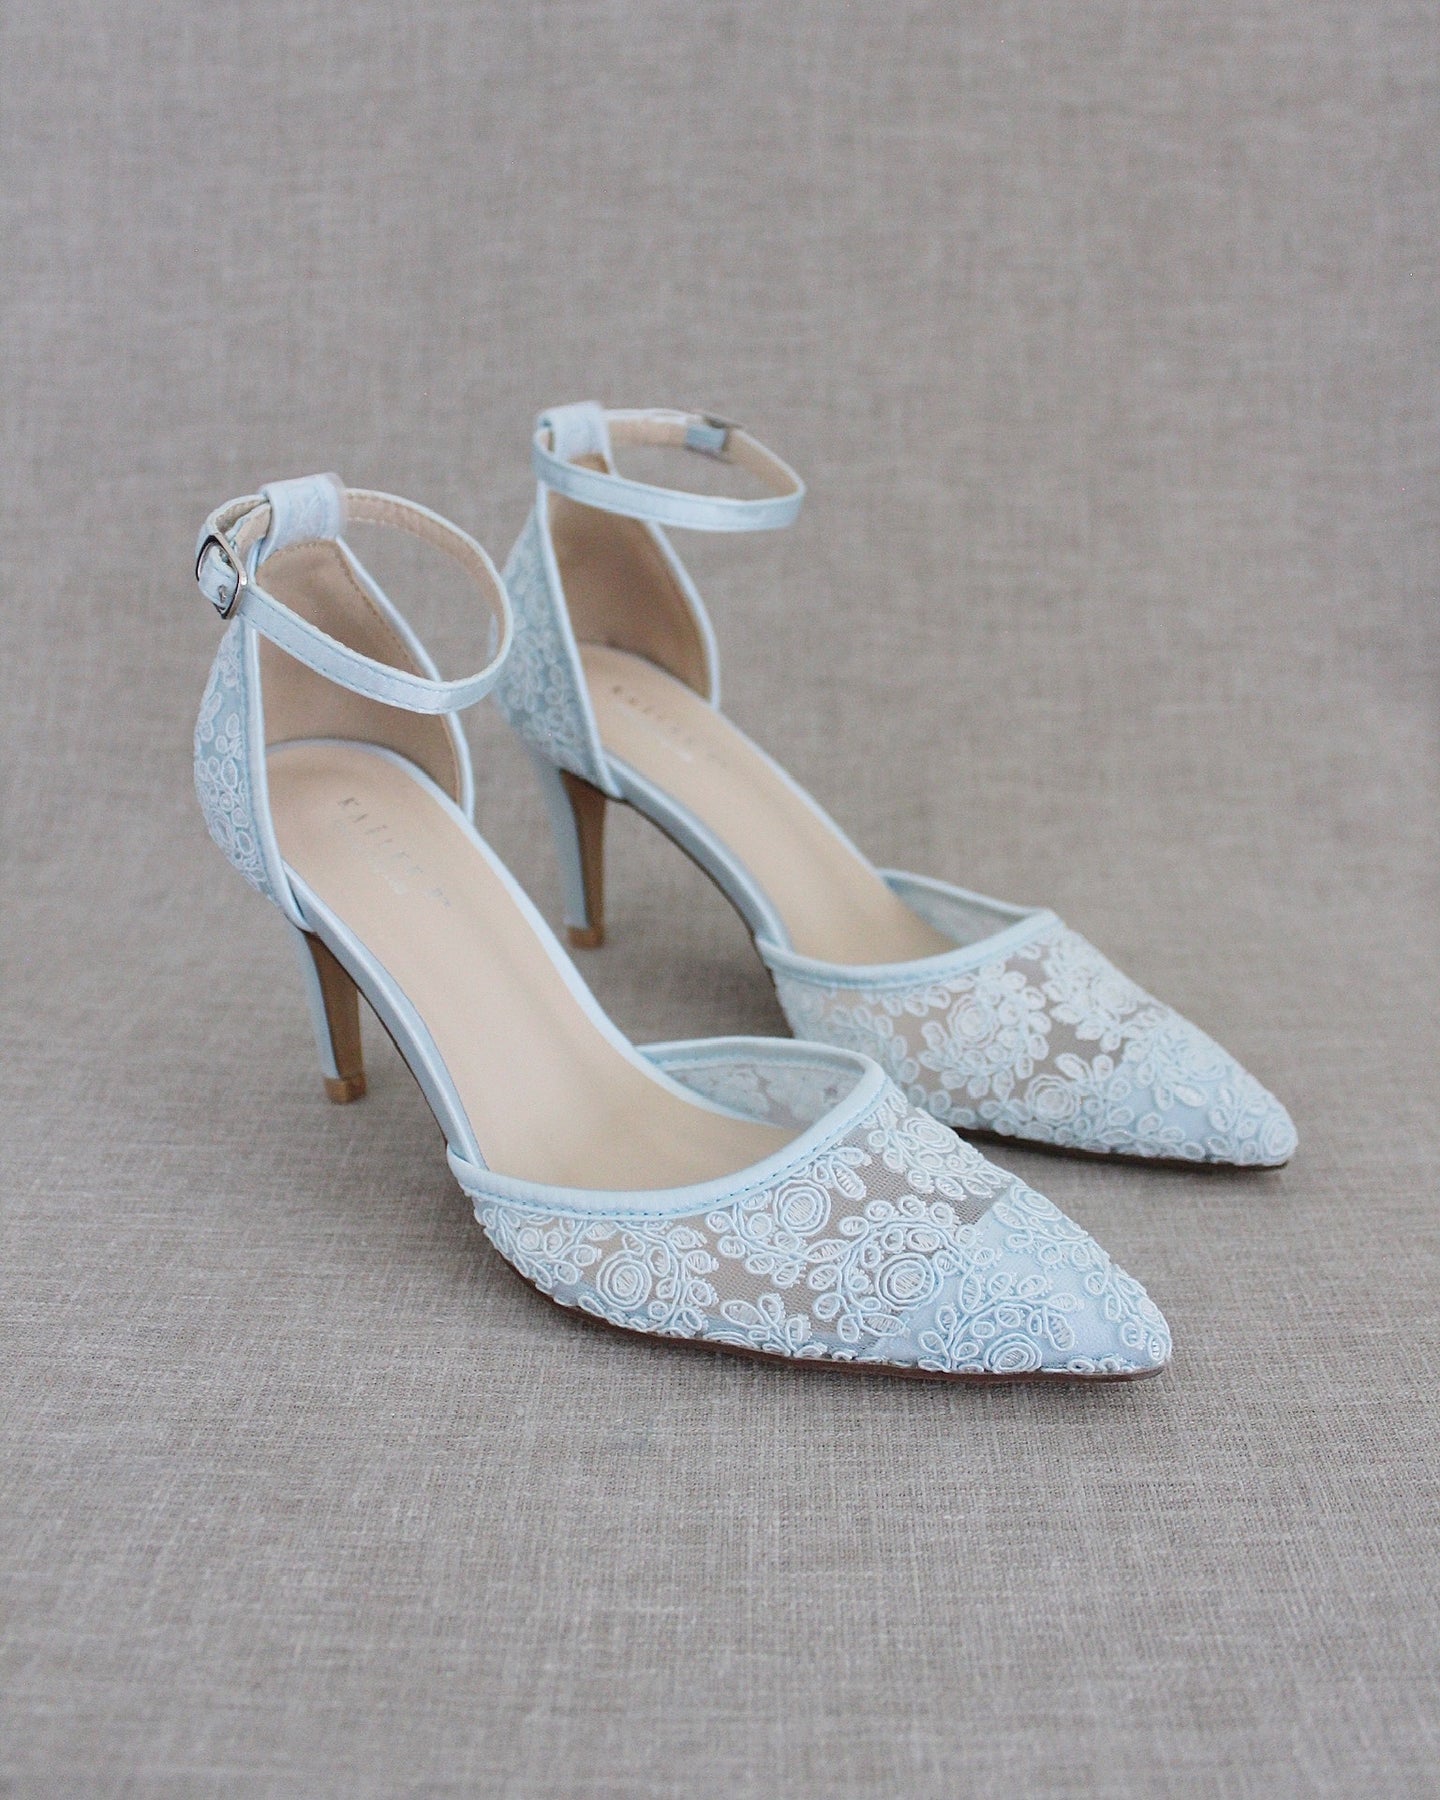 Bridal Shoes with Organza Lace - D'Orsay Ankle Strap Heels - Wedding Block Heel - Ivory Shoes for Bride - Women's Wedding Shoes .